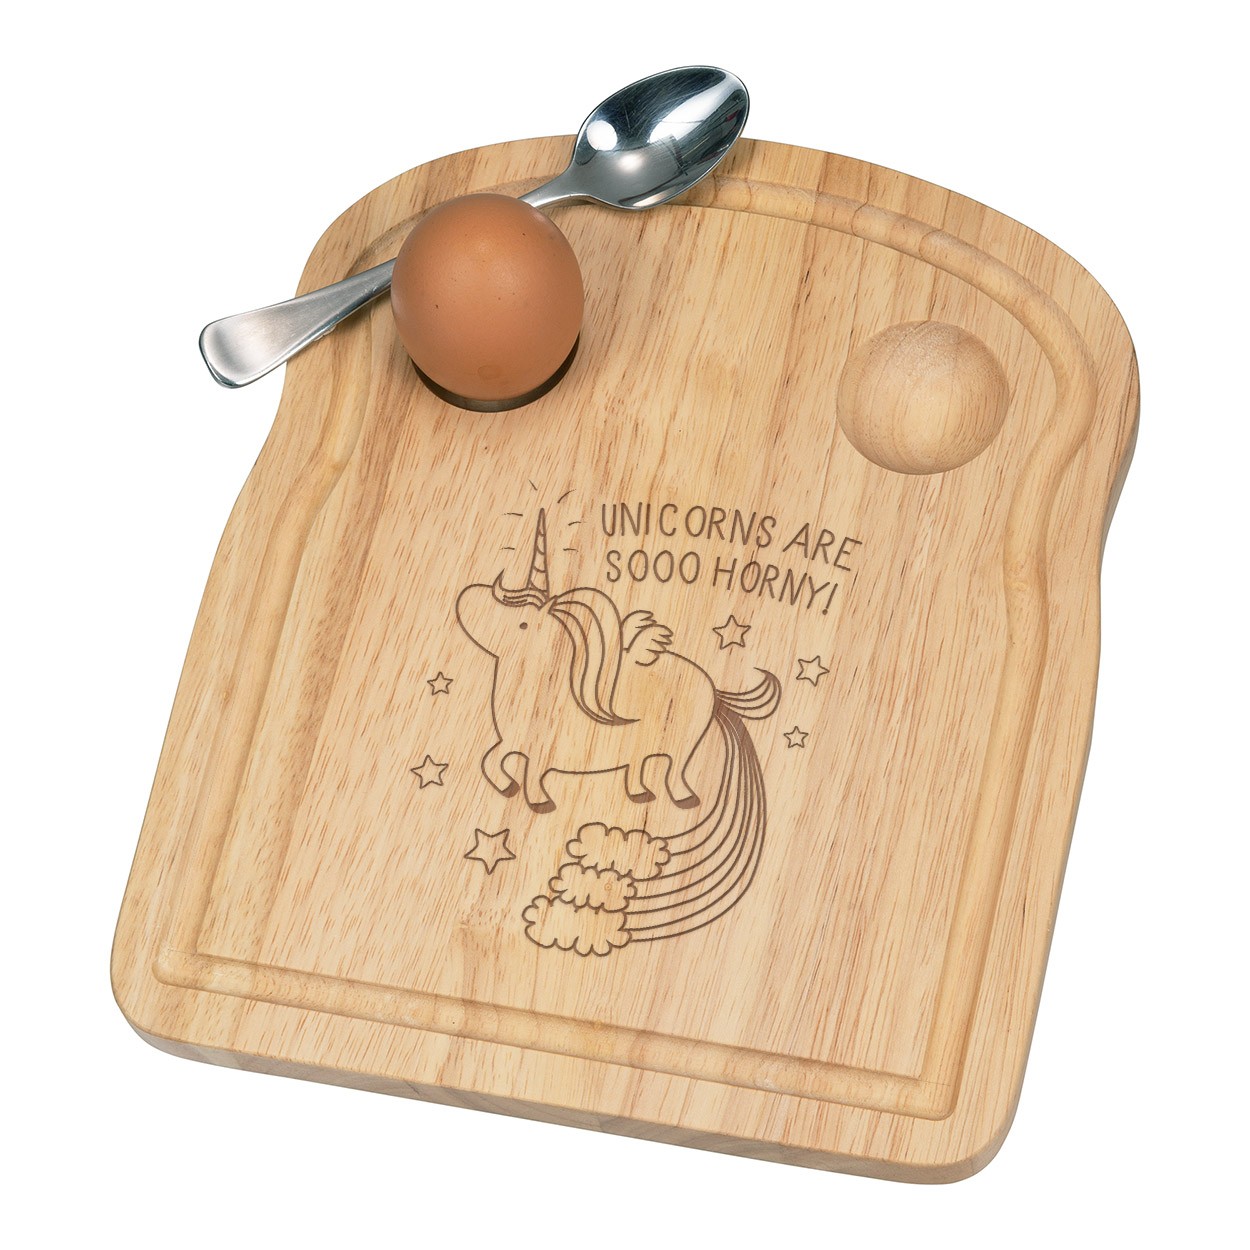 Unicorns Are Sooo Horny Breakfast Dippy Egg Cup Board Wooden